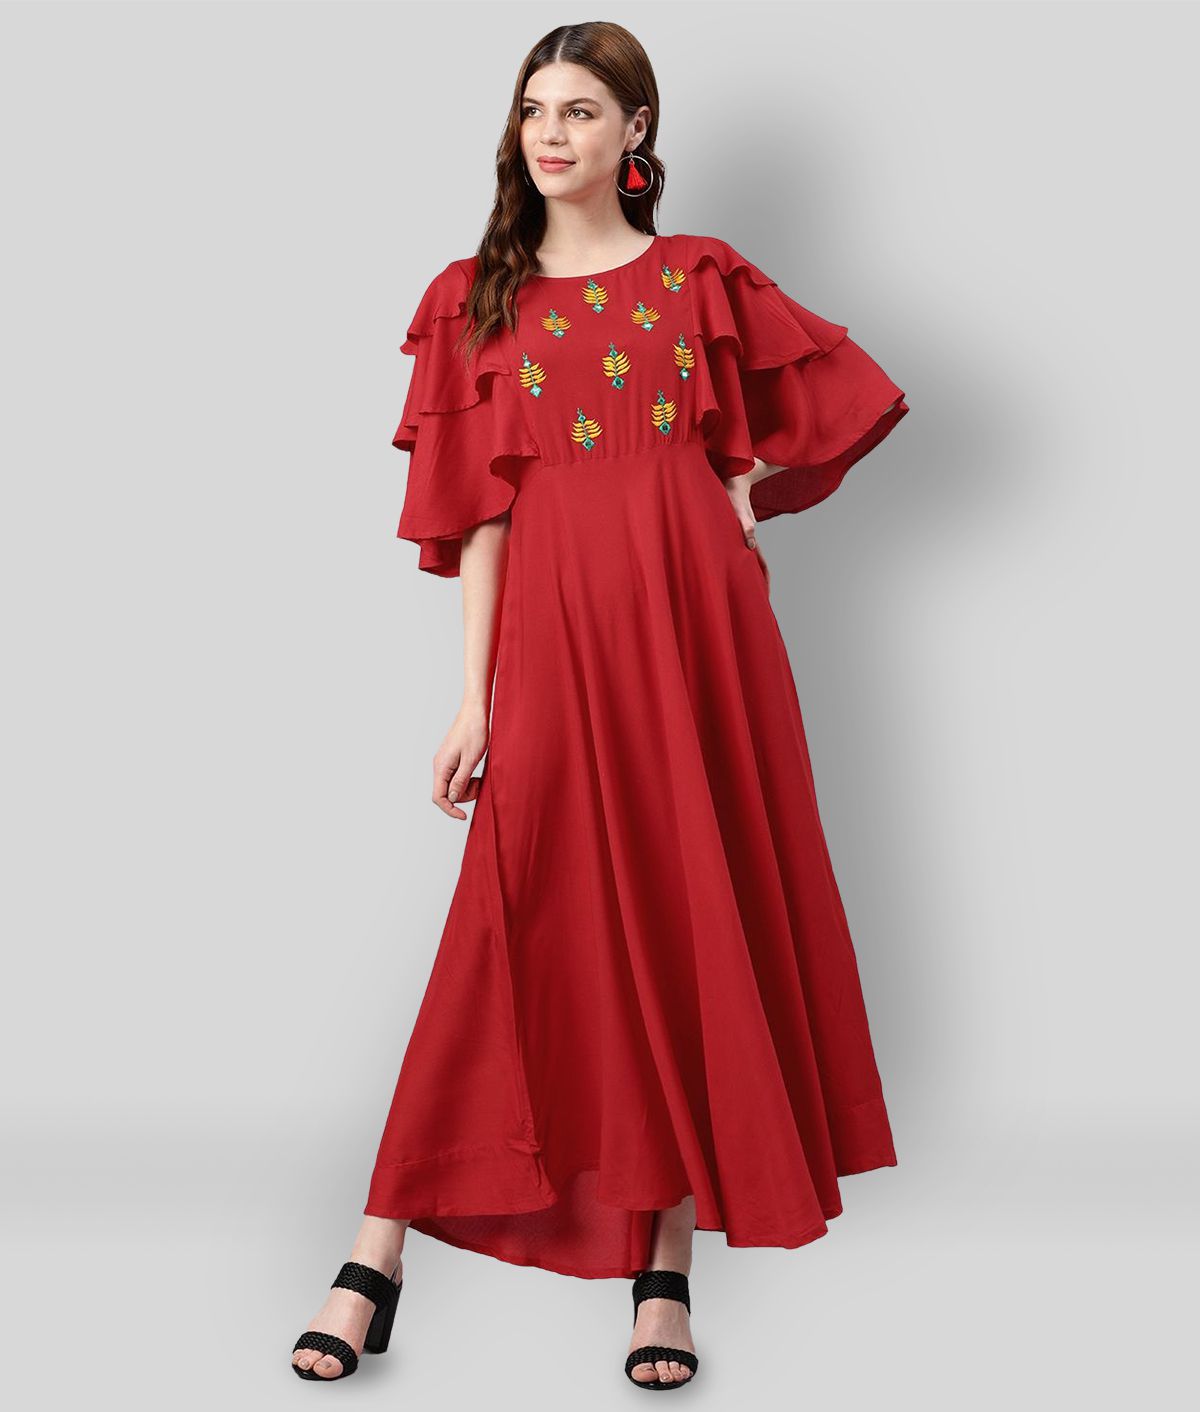     			Yash Gallery - Red Rayon Women's A-line Dress ( Pack of 1 )